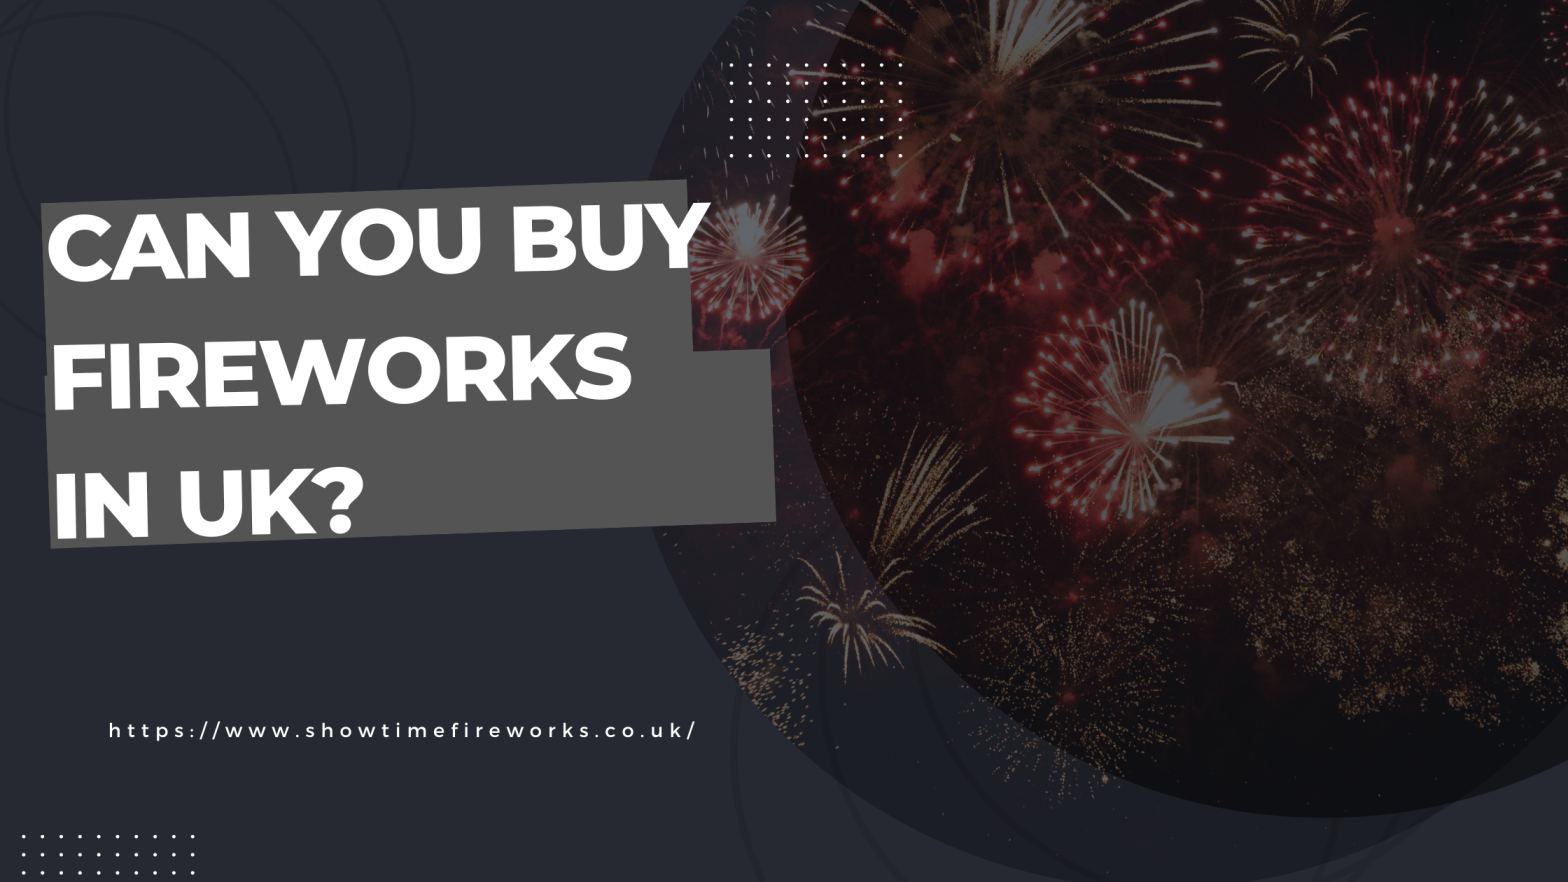 Can You Buy Fireworks in UK blog Cover Image (1).png